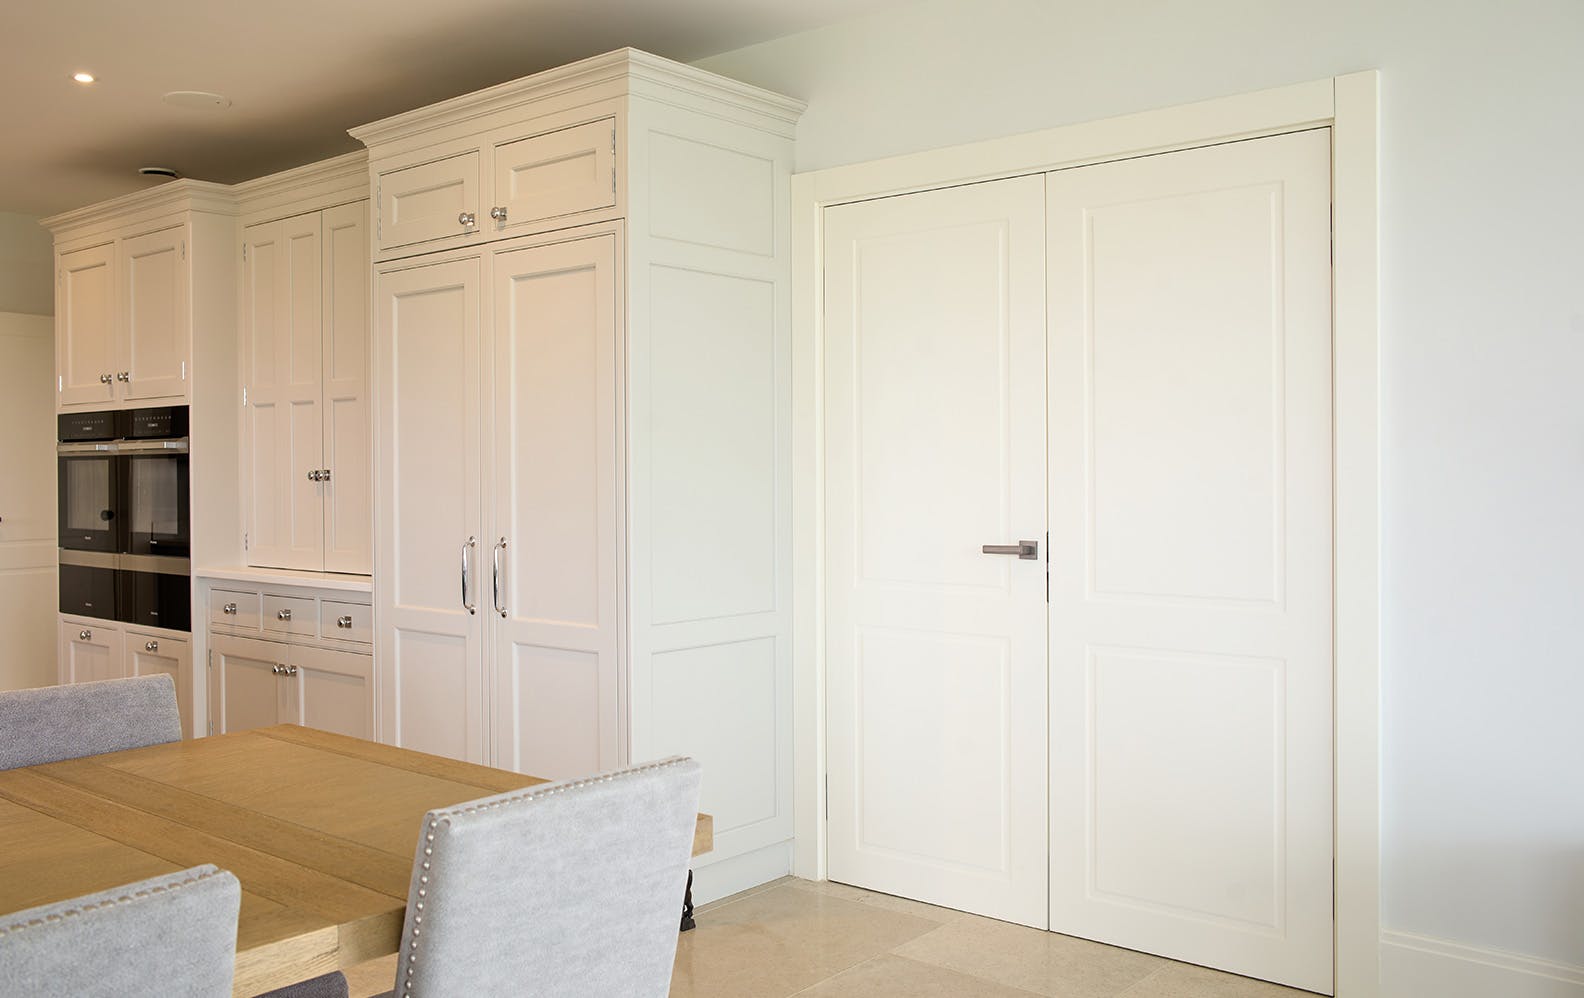 A modern country style kitchen featuring a double leaf Deuren door set - Victorian style  with two routed rectangluar shaped details in a white painted finish.